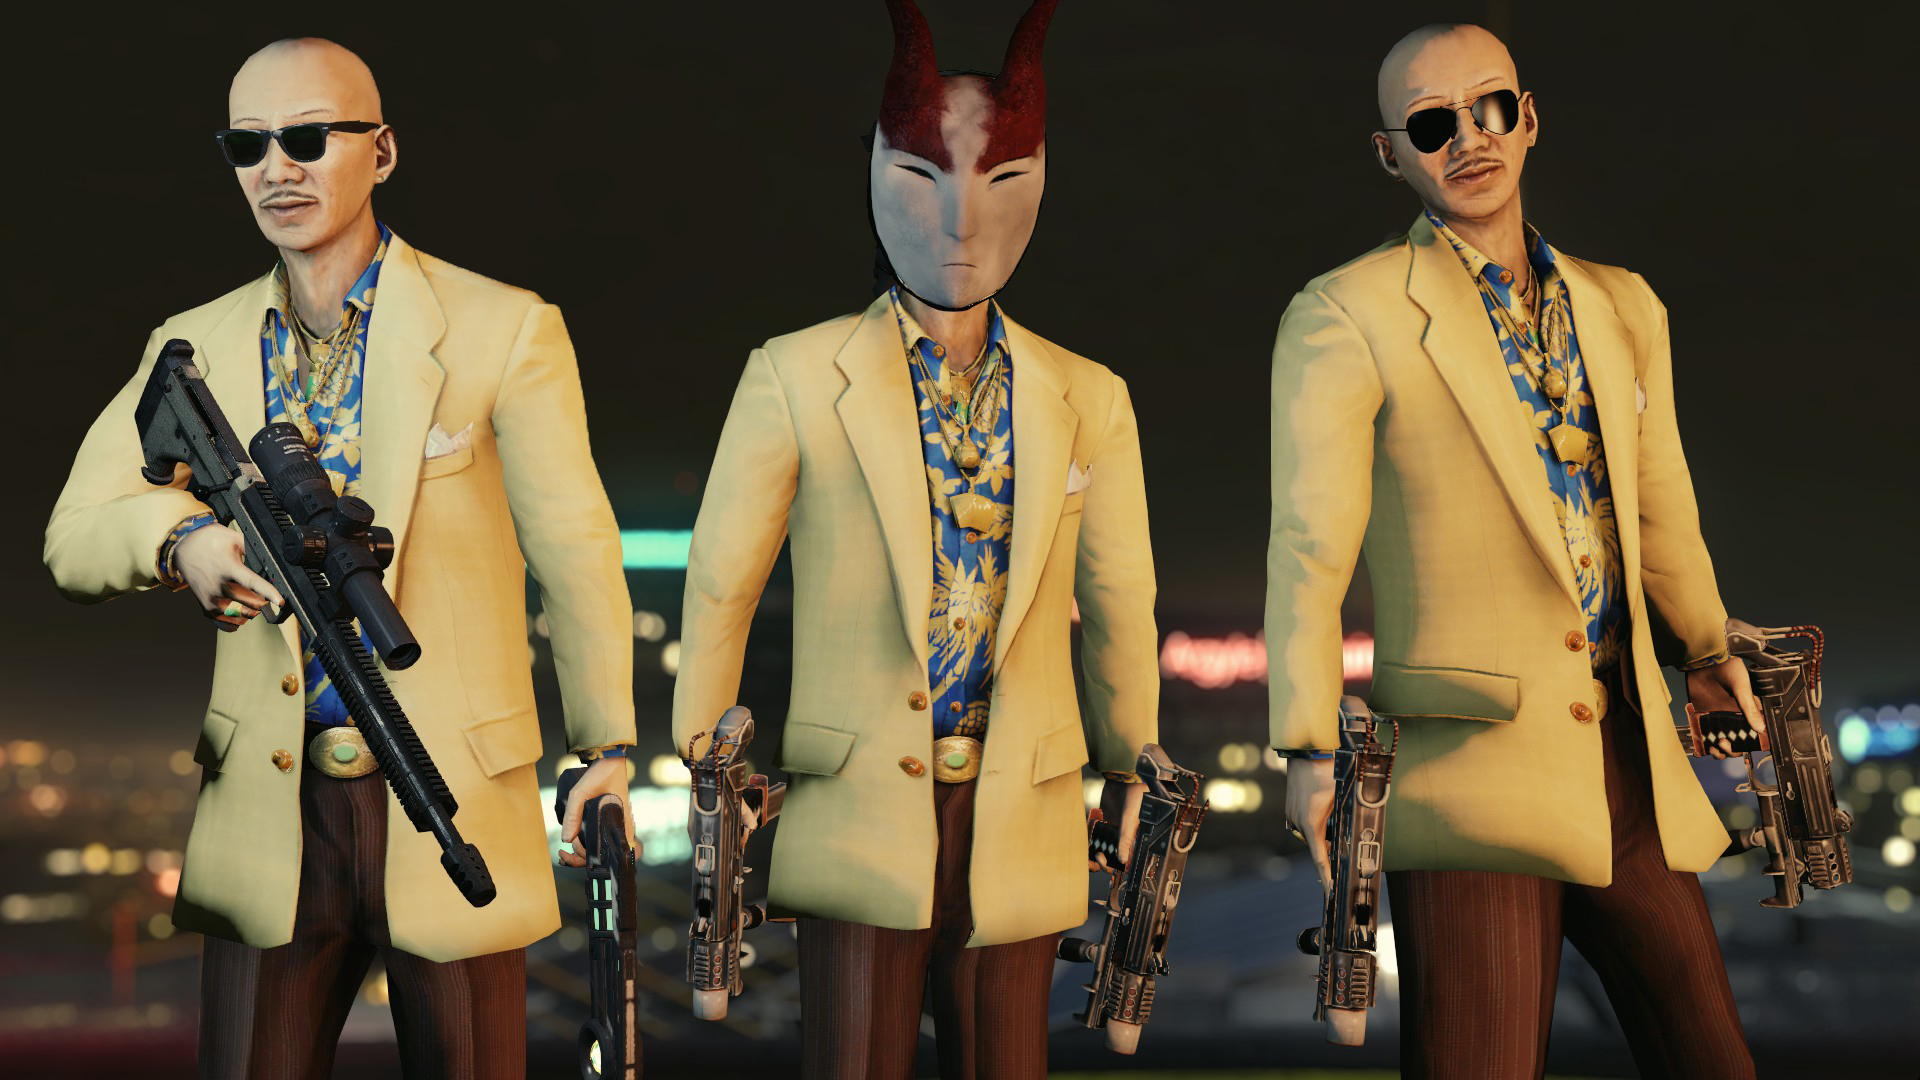 Sleeping Dogs - Benny The Manager [LAS] - PAYDAY 2 Mods - ModWorkshop